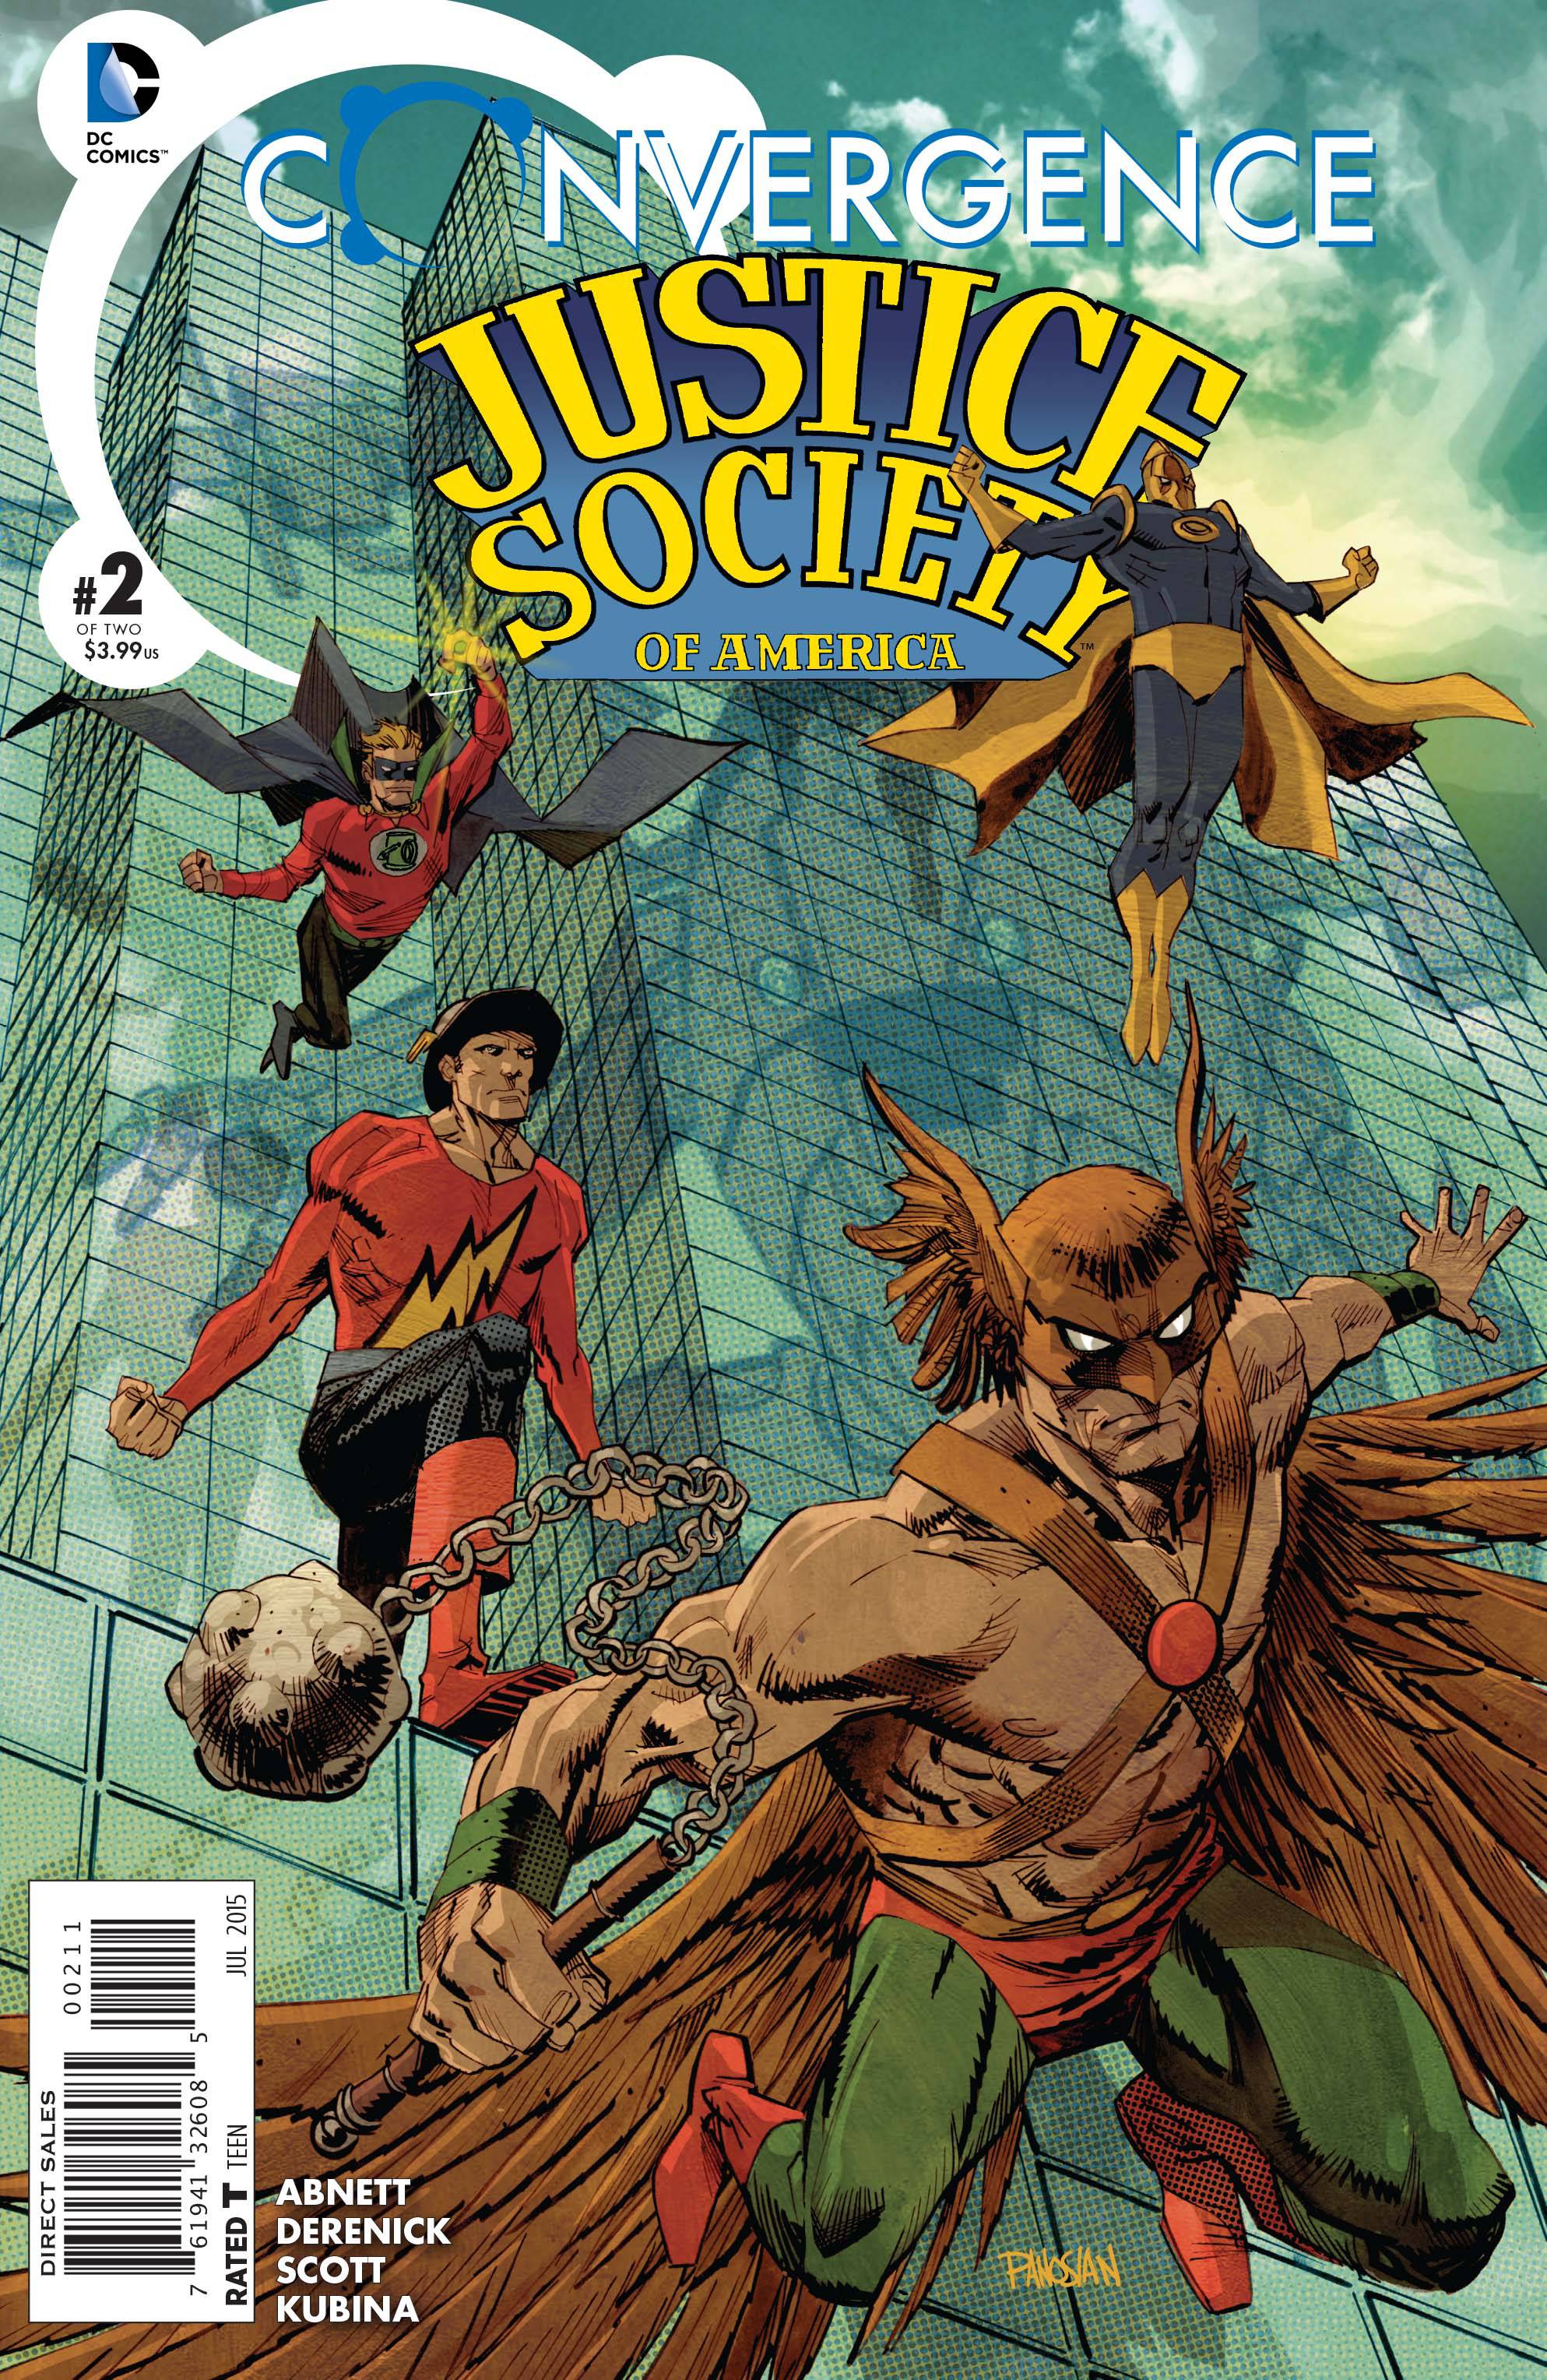 Convergence: Justice Society of America no. 2